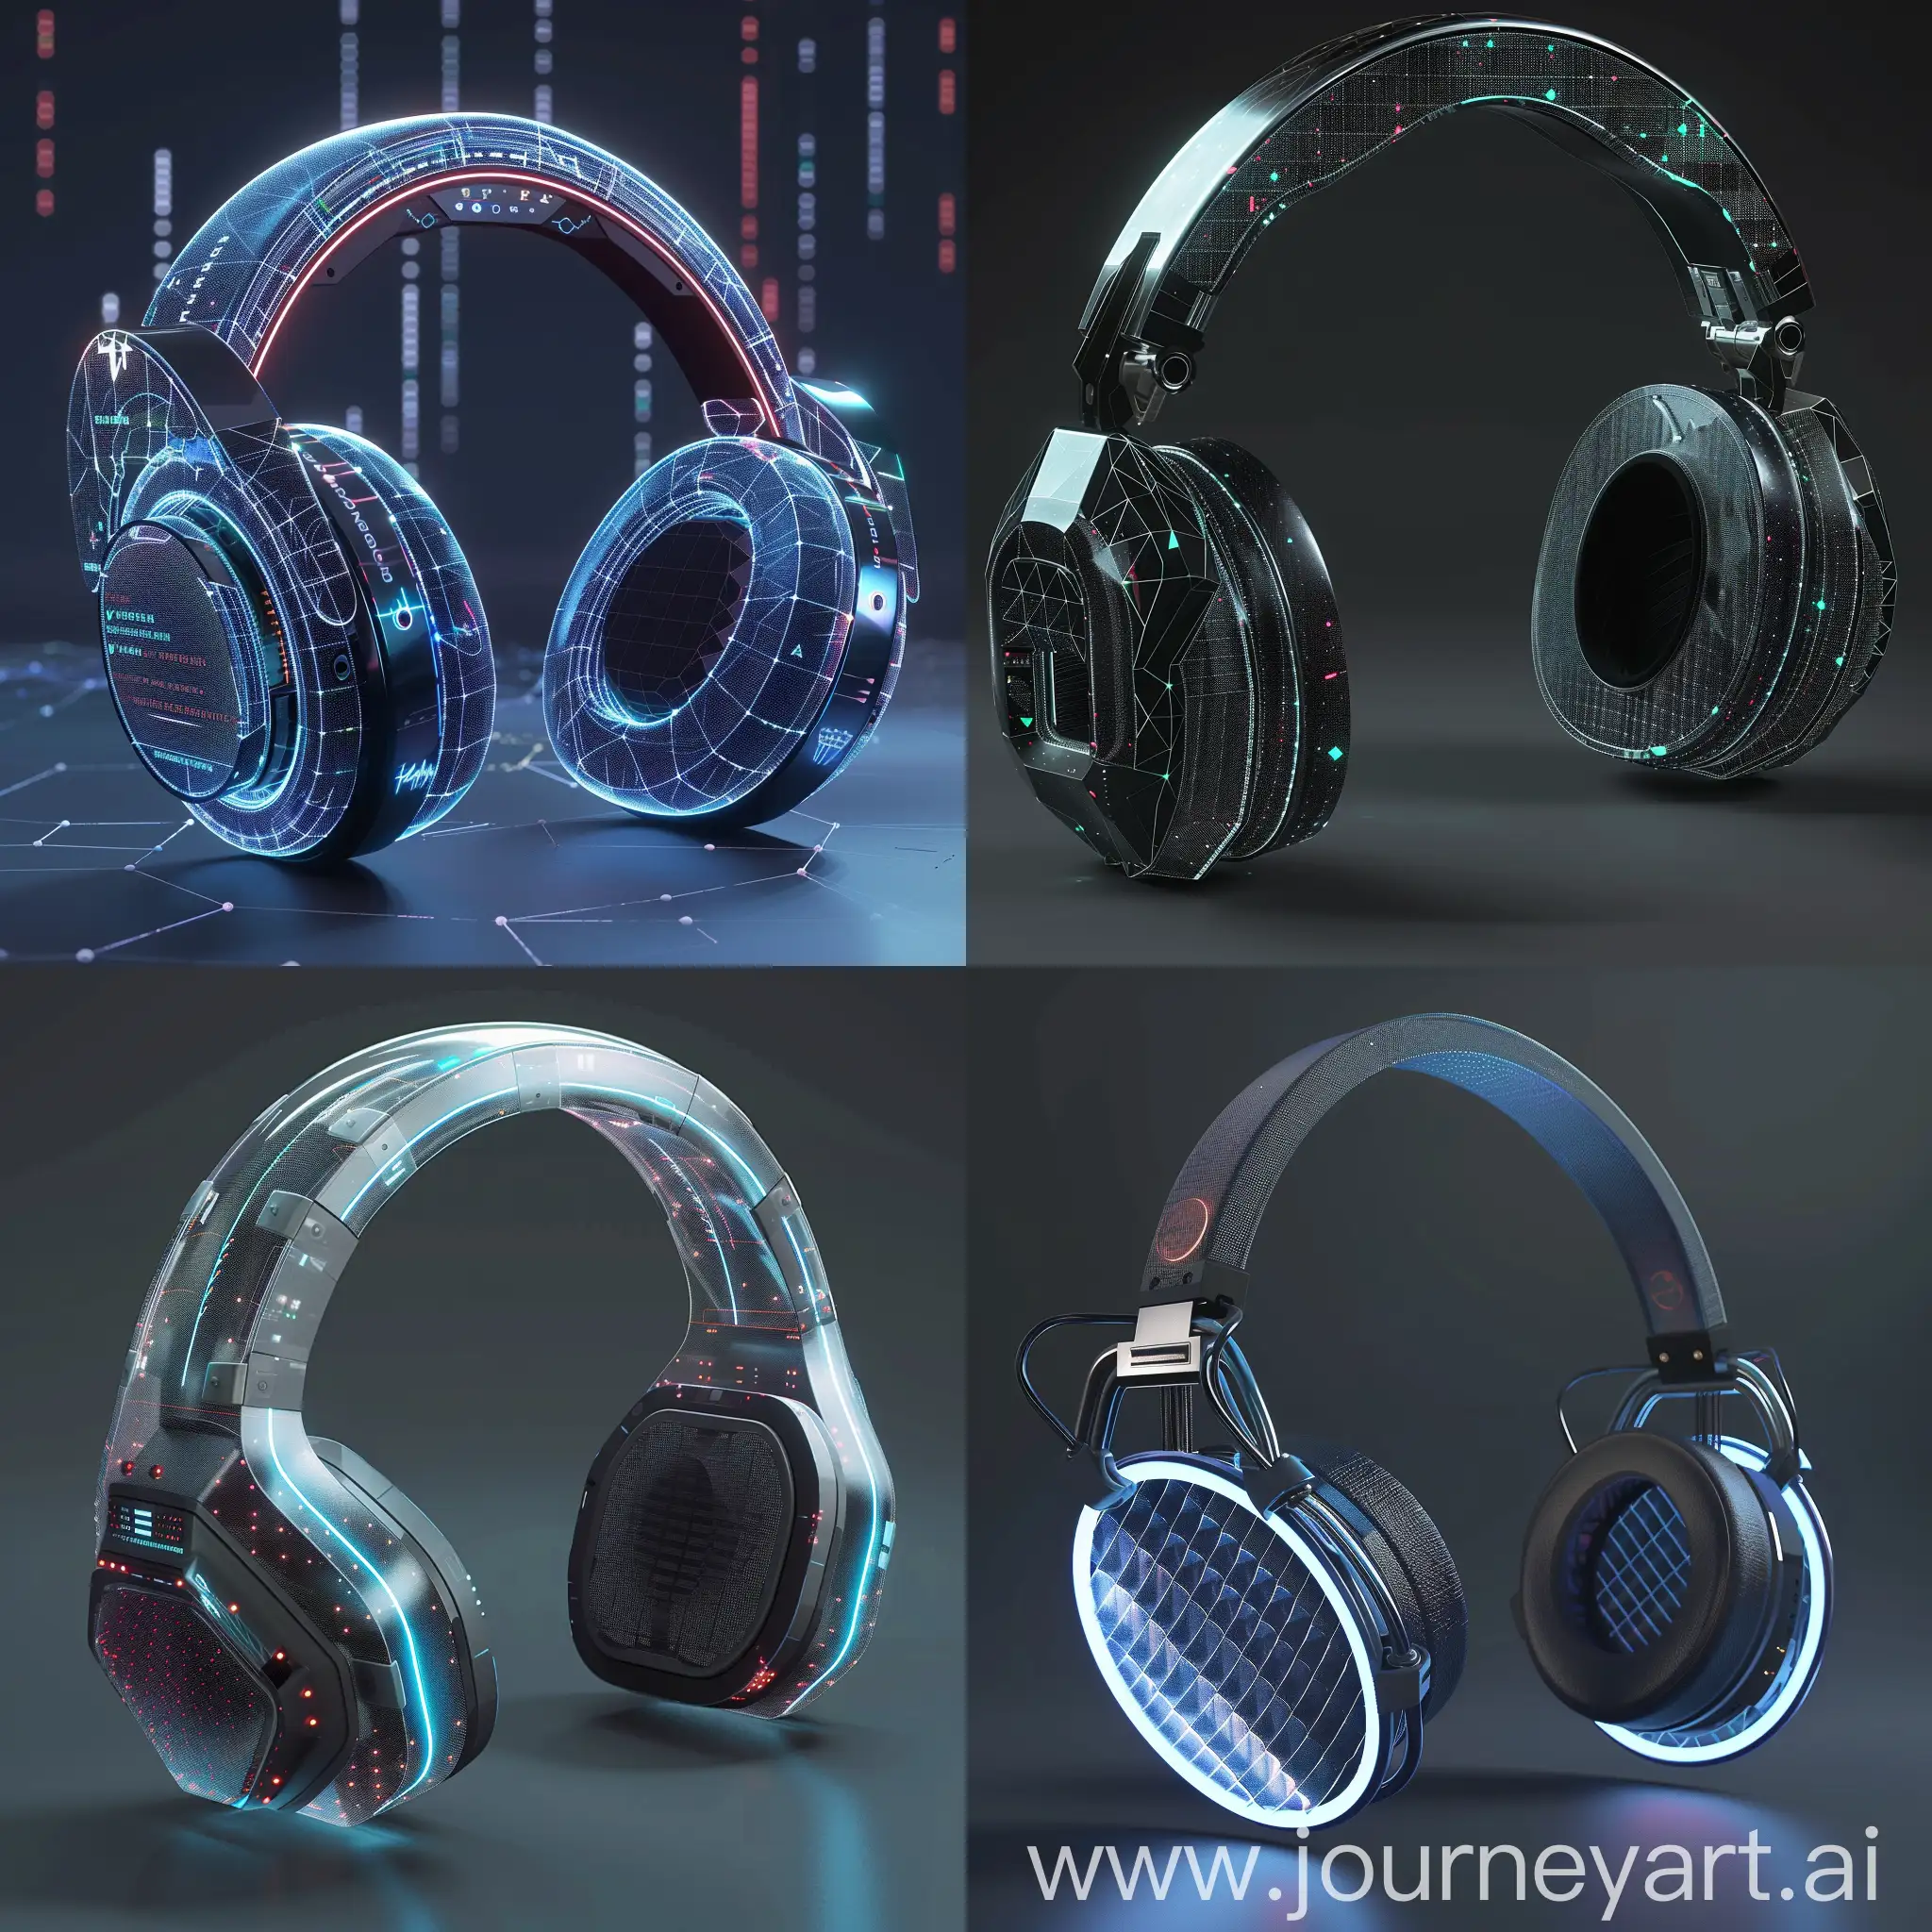 Futuristic-PC-Headphones-with-Holographic-Display-and-AI-Soundscape-Customization